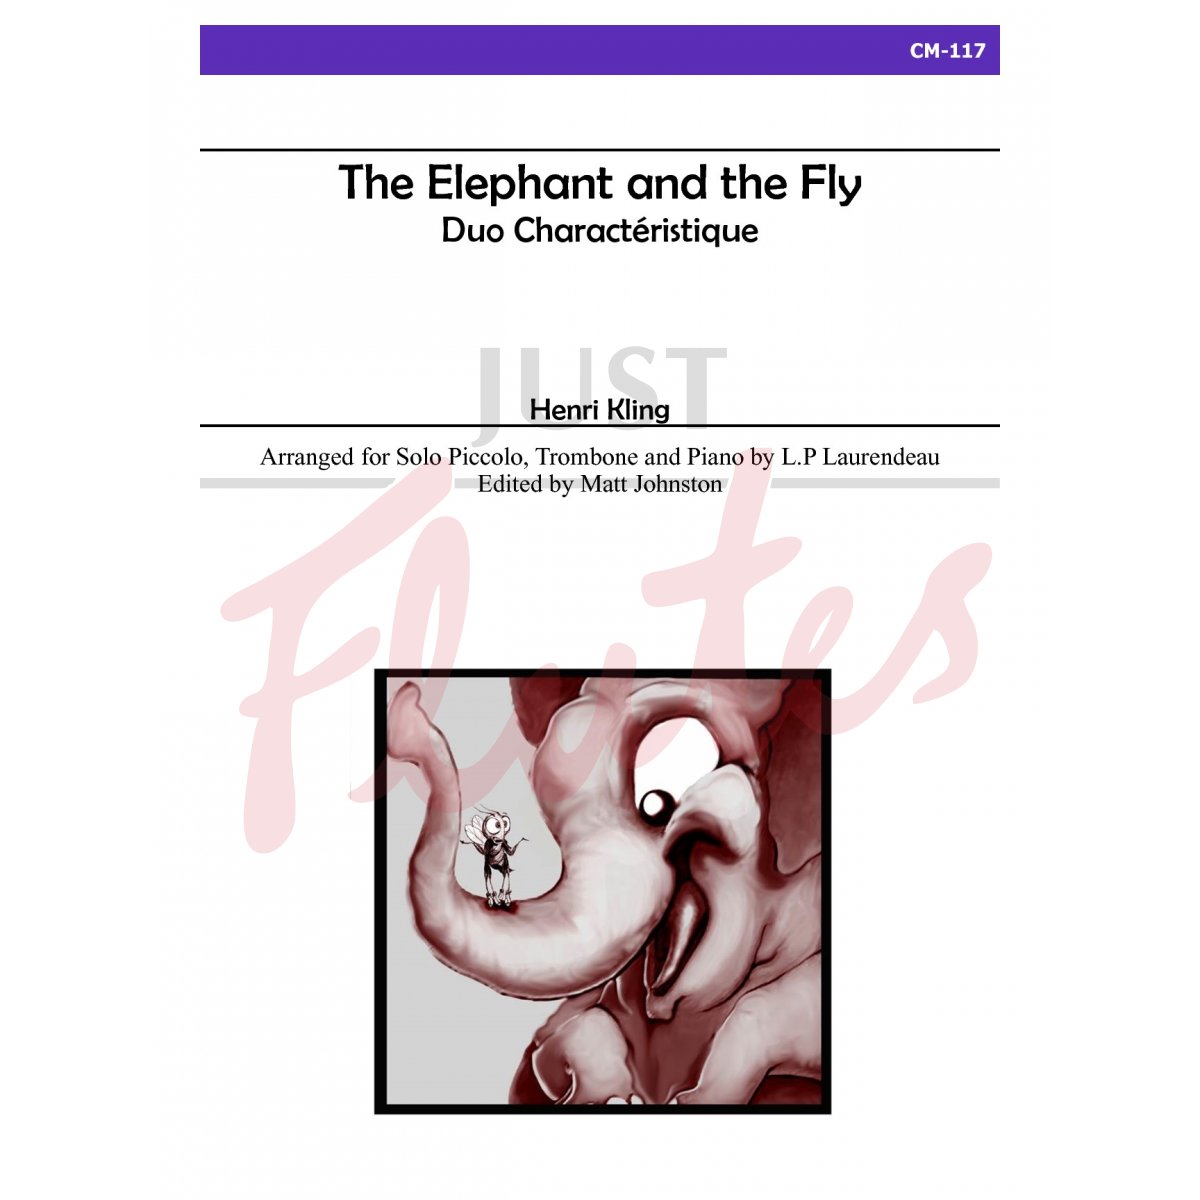 The Elephant and the Fly: Duo Charactéristique for Solo Piccolo, Trombone and Piano